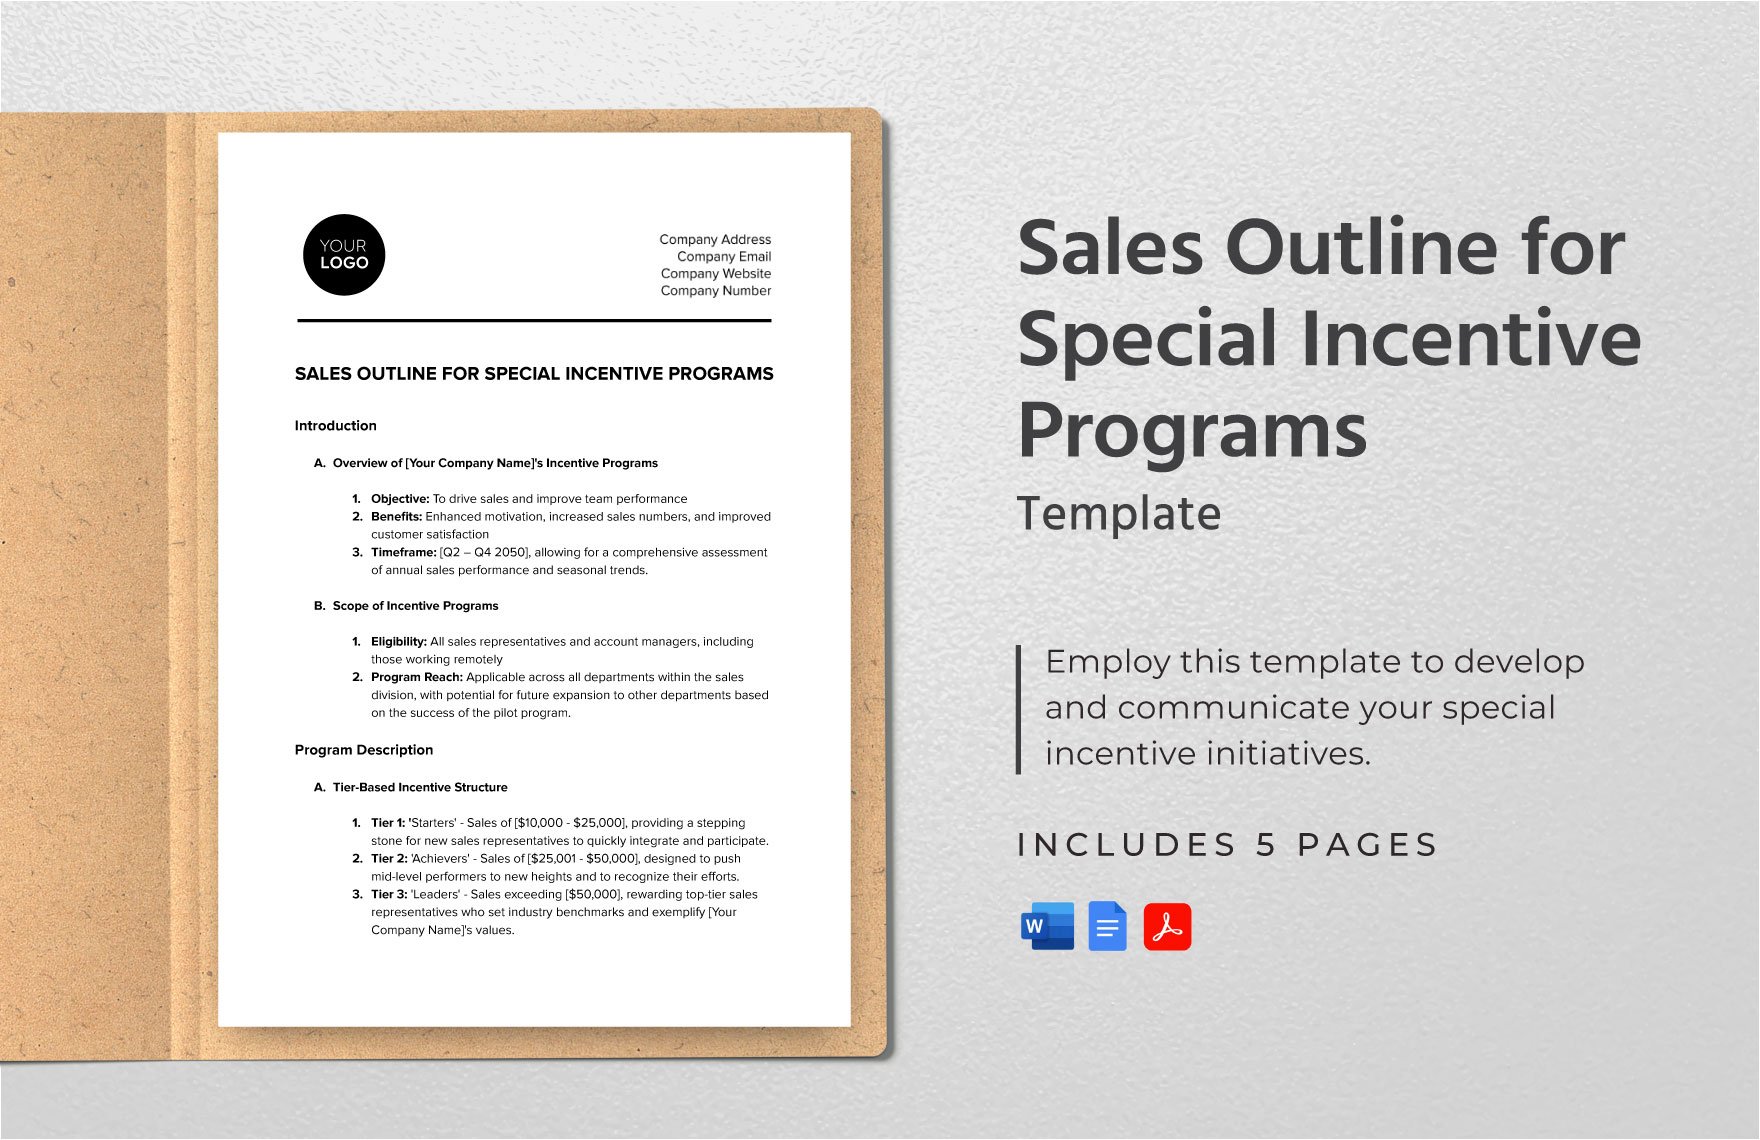 Sales Outline for Special Incentive Programs Template in Word, Google Docs, PDF